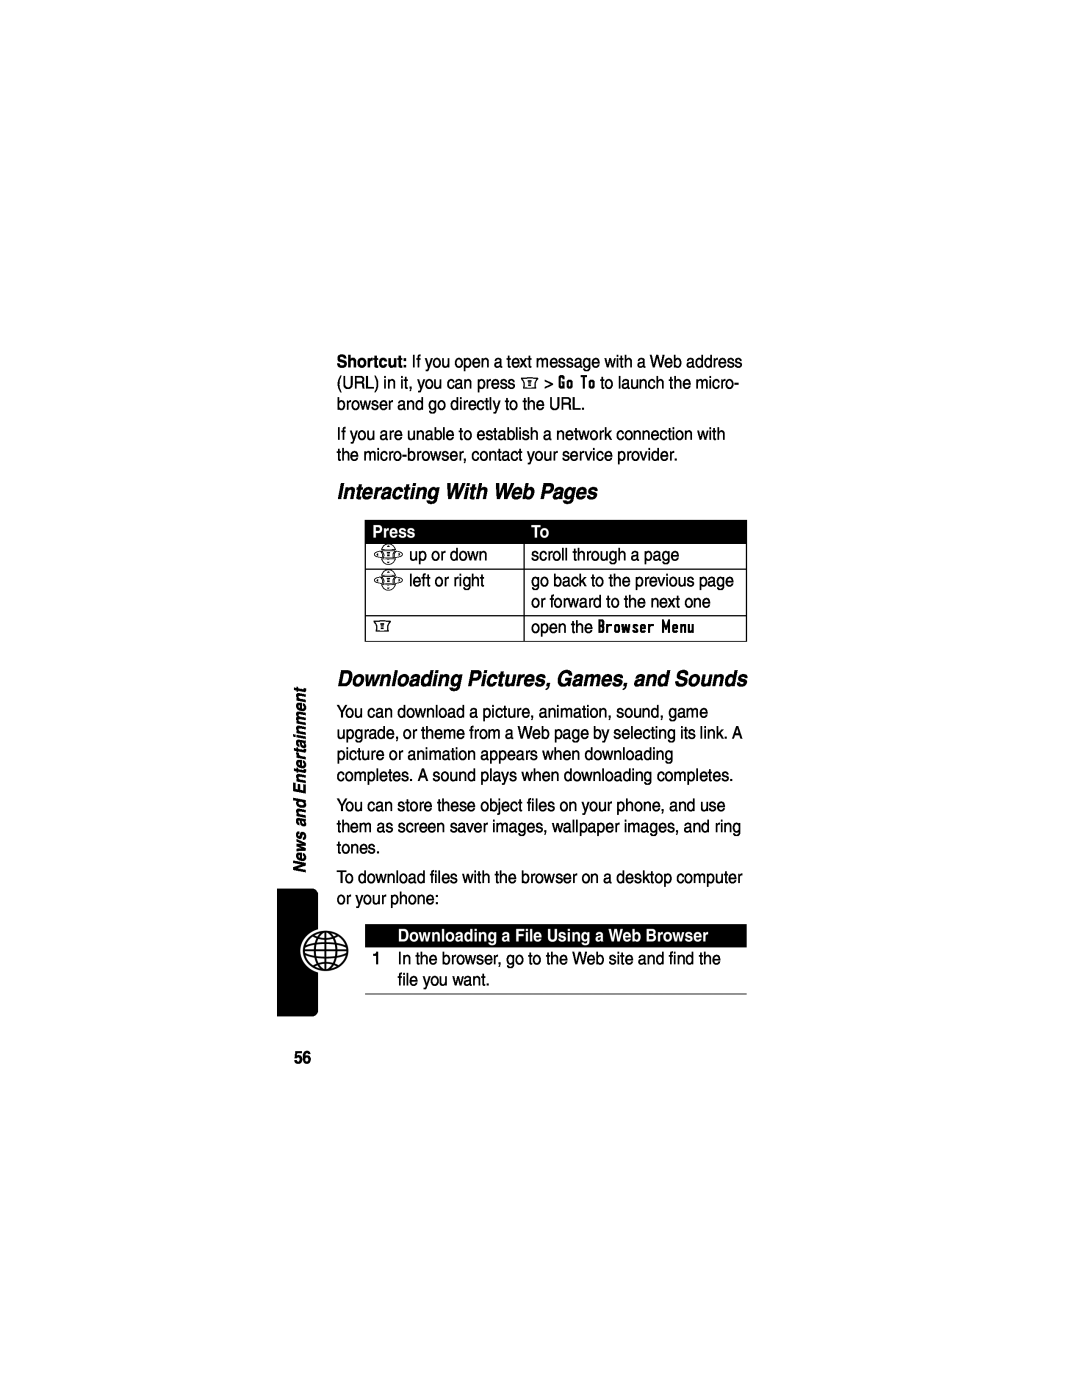 Motorola WIRELESS TELEPHONE manual Interacting With Web Pages, Downloading Pictures, Games, and Sounds, Press 